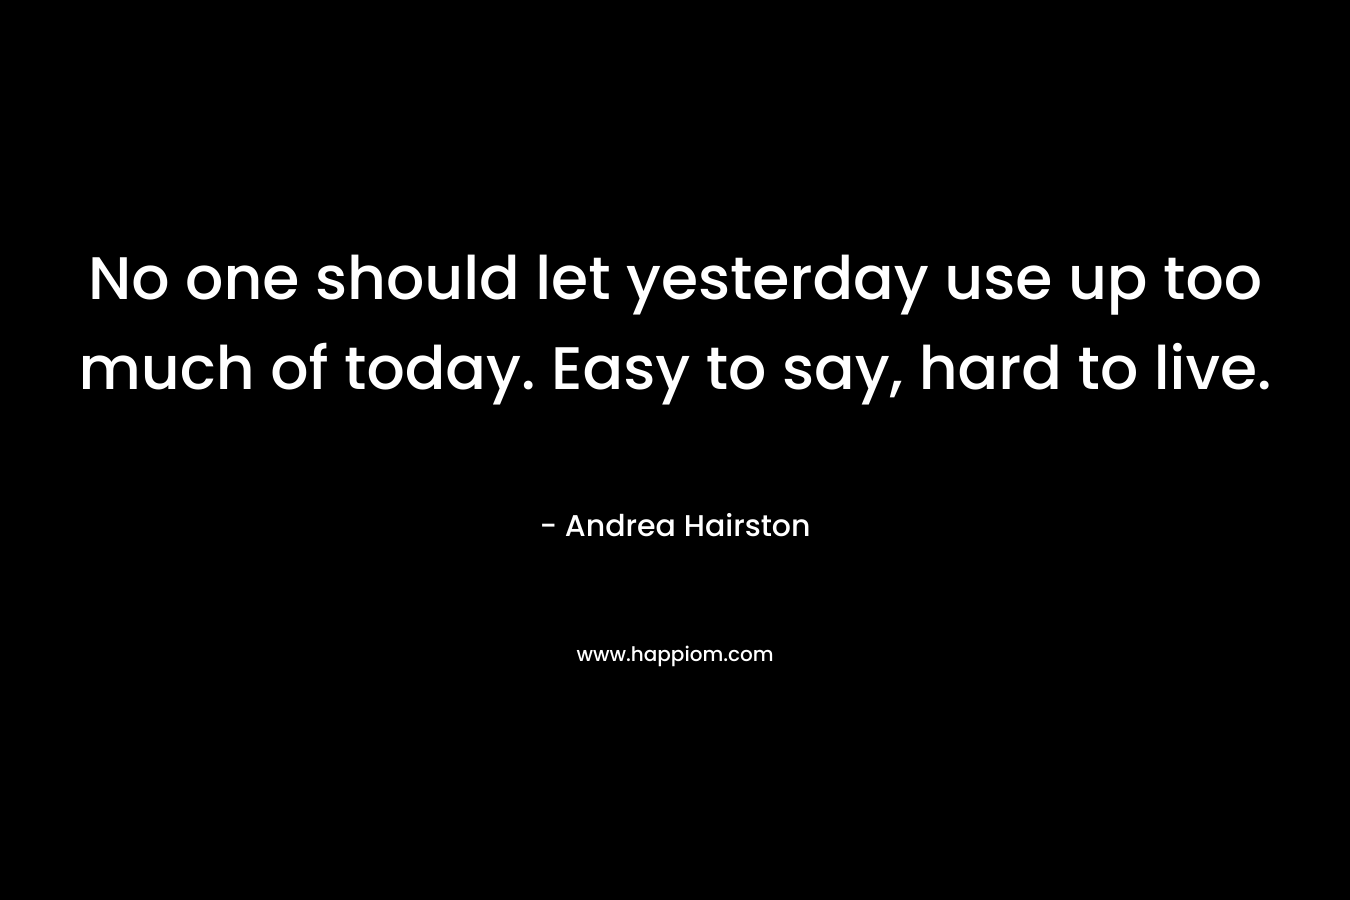 No one should let yesterday use up too much of today. Easy to say, hard to live.